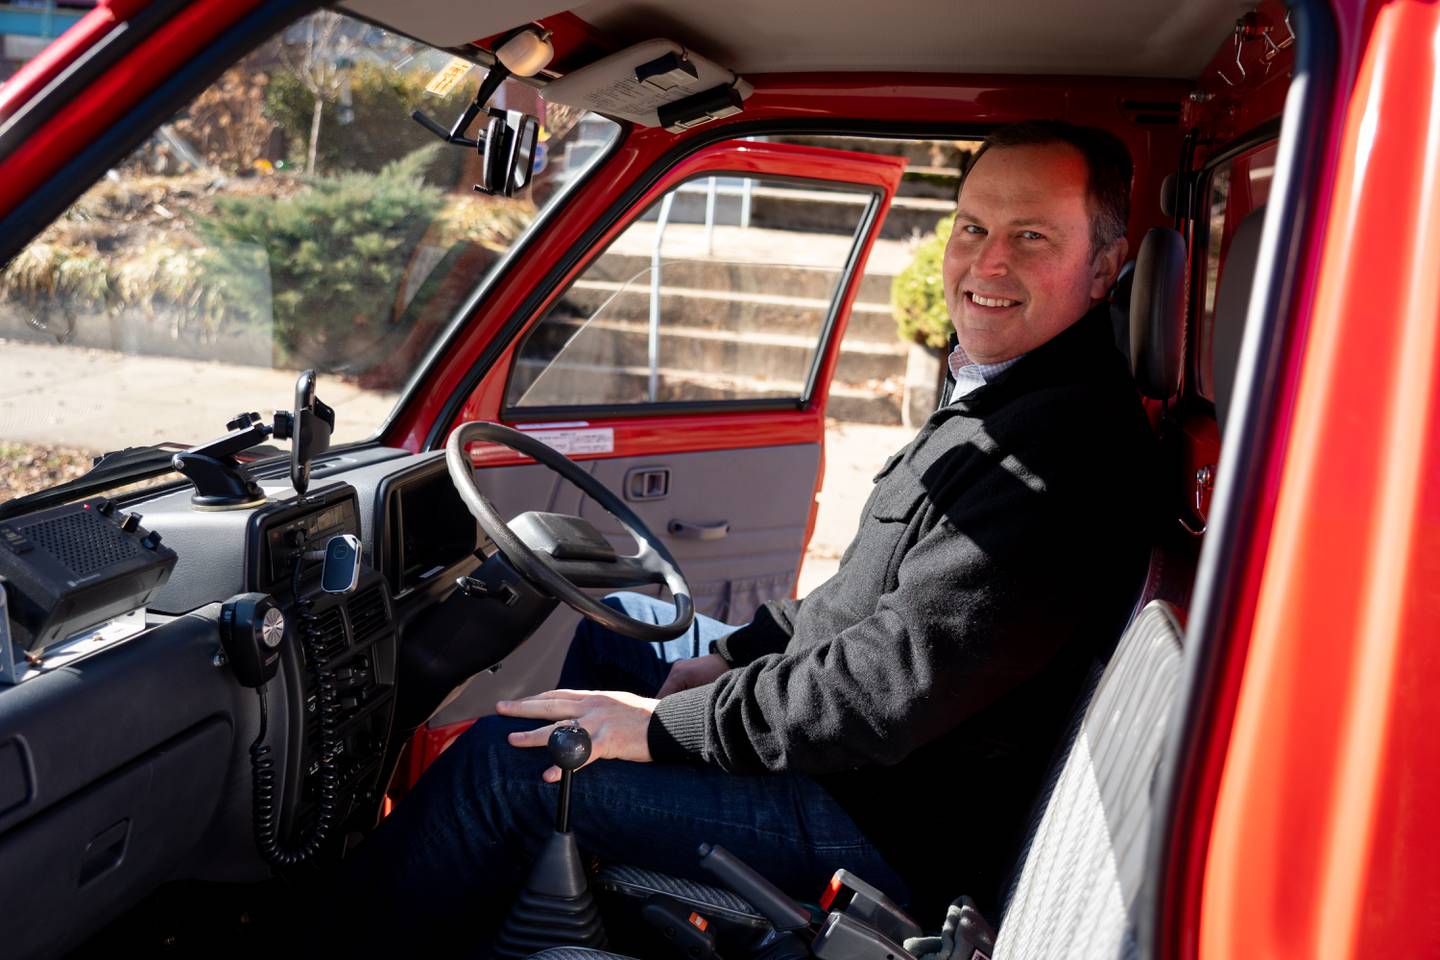 Brett Rogers with Yama, his 30-year-old Japanese firetruck, in Charles Village on January 24, 2023.